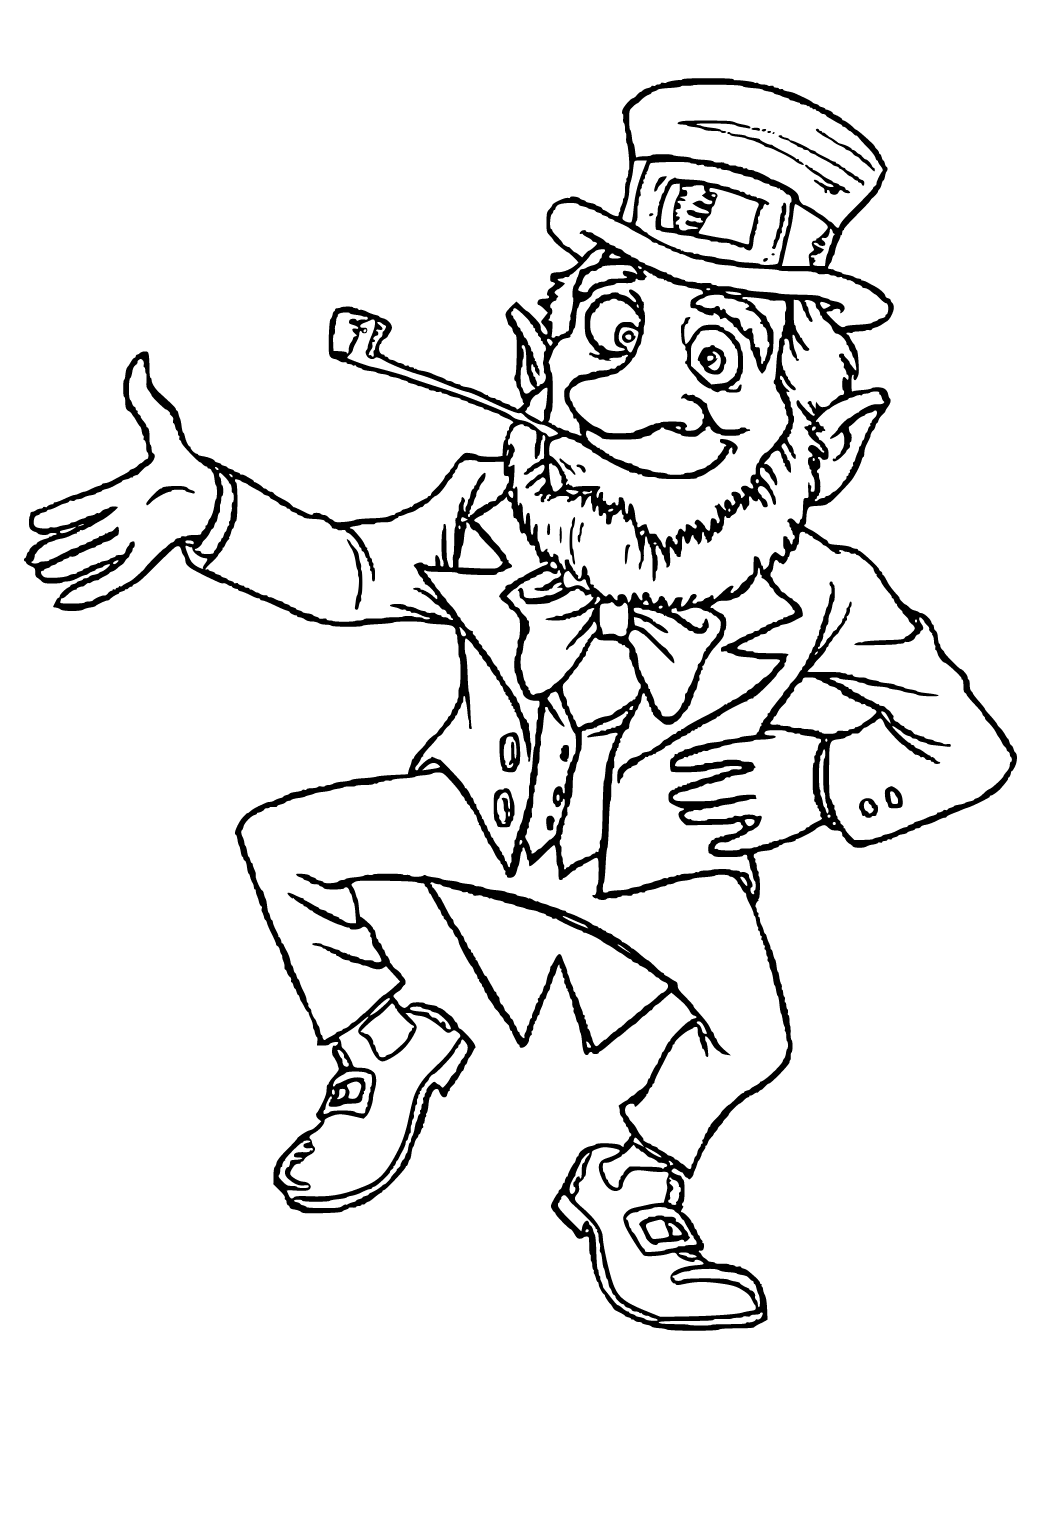 Free printable st patricks day dance coloring page for adults and kids